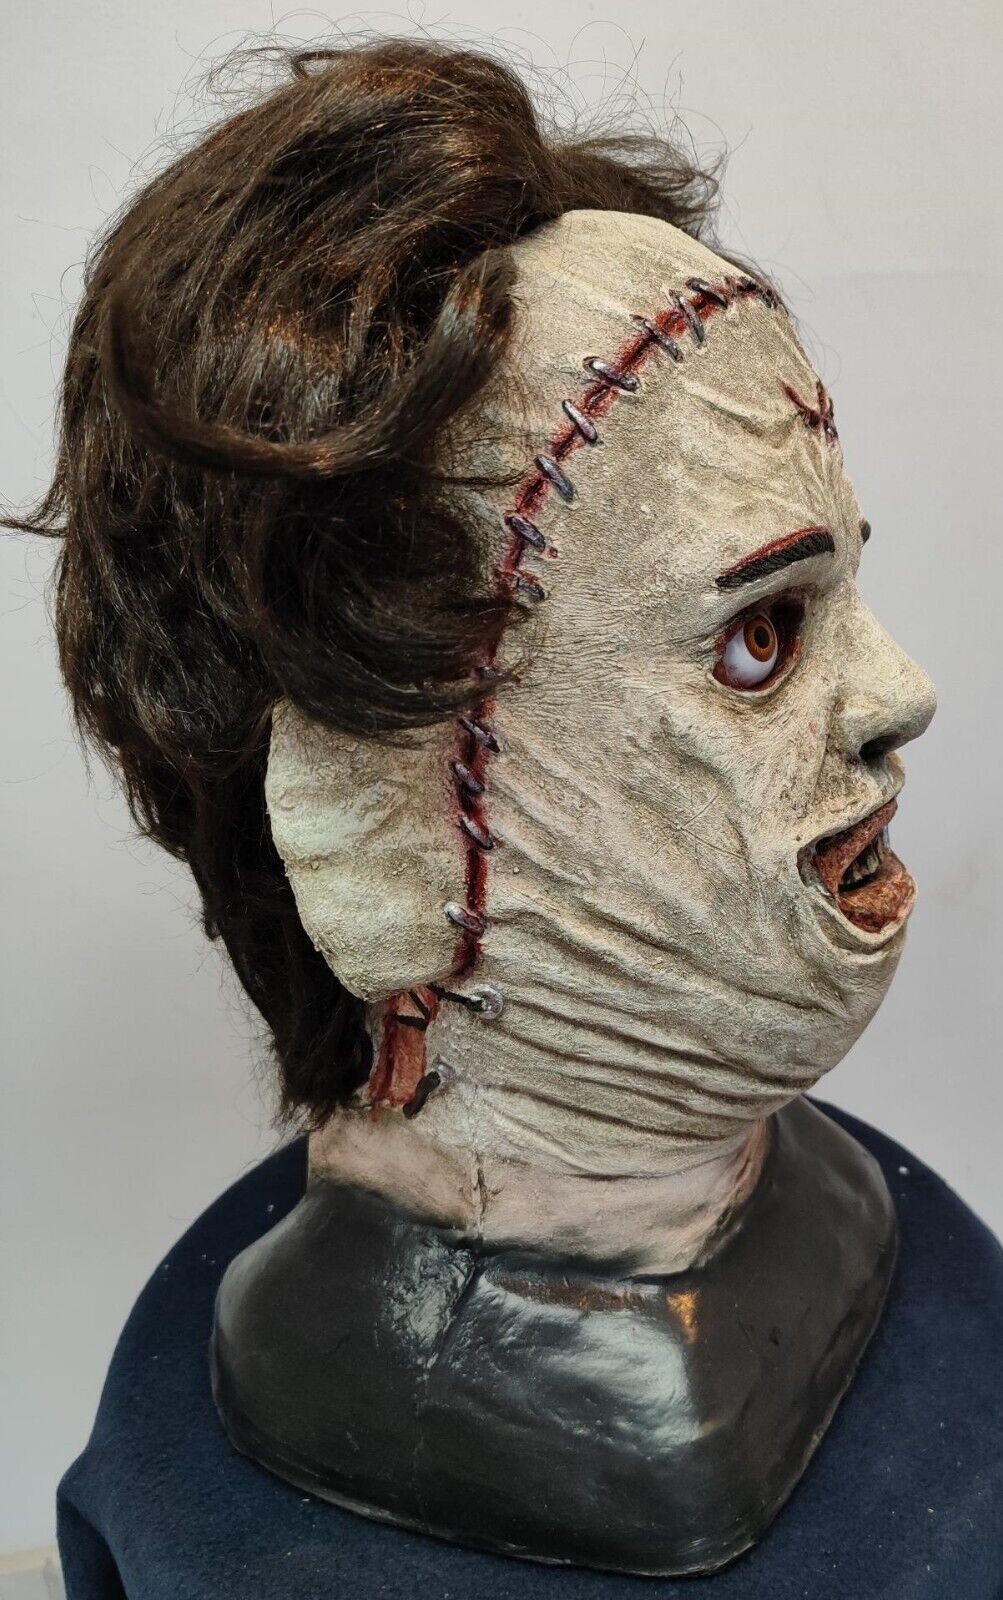 Leather Face Bust - Latex foam filled with hair and cristal eyes. Lifesize 1:1